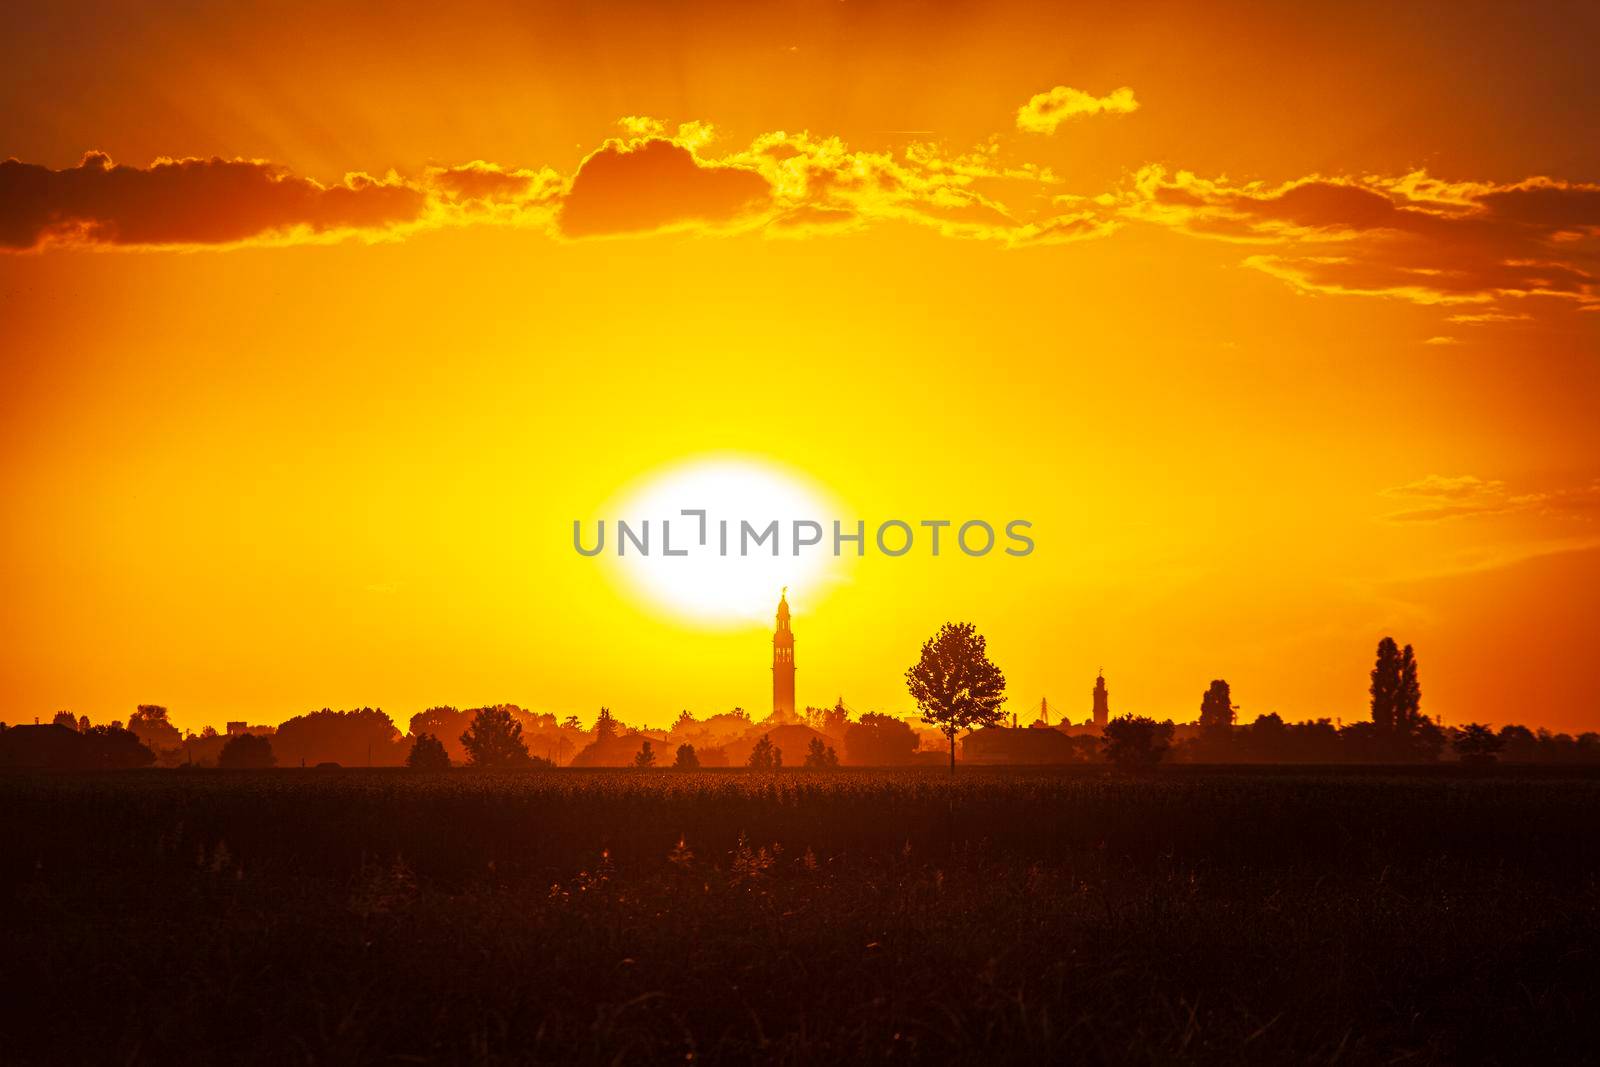 Sunset in a landscape with bell tower, trees and countryside